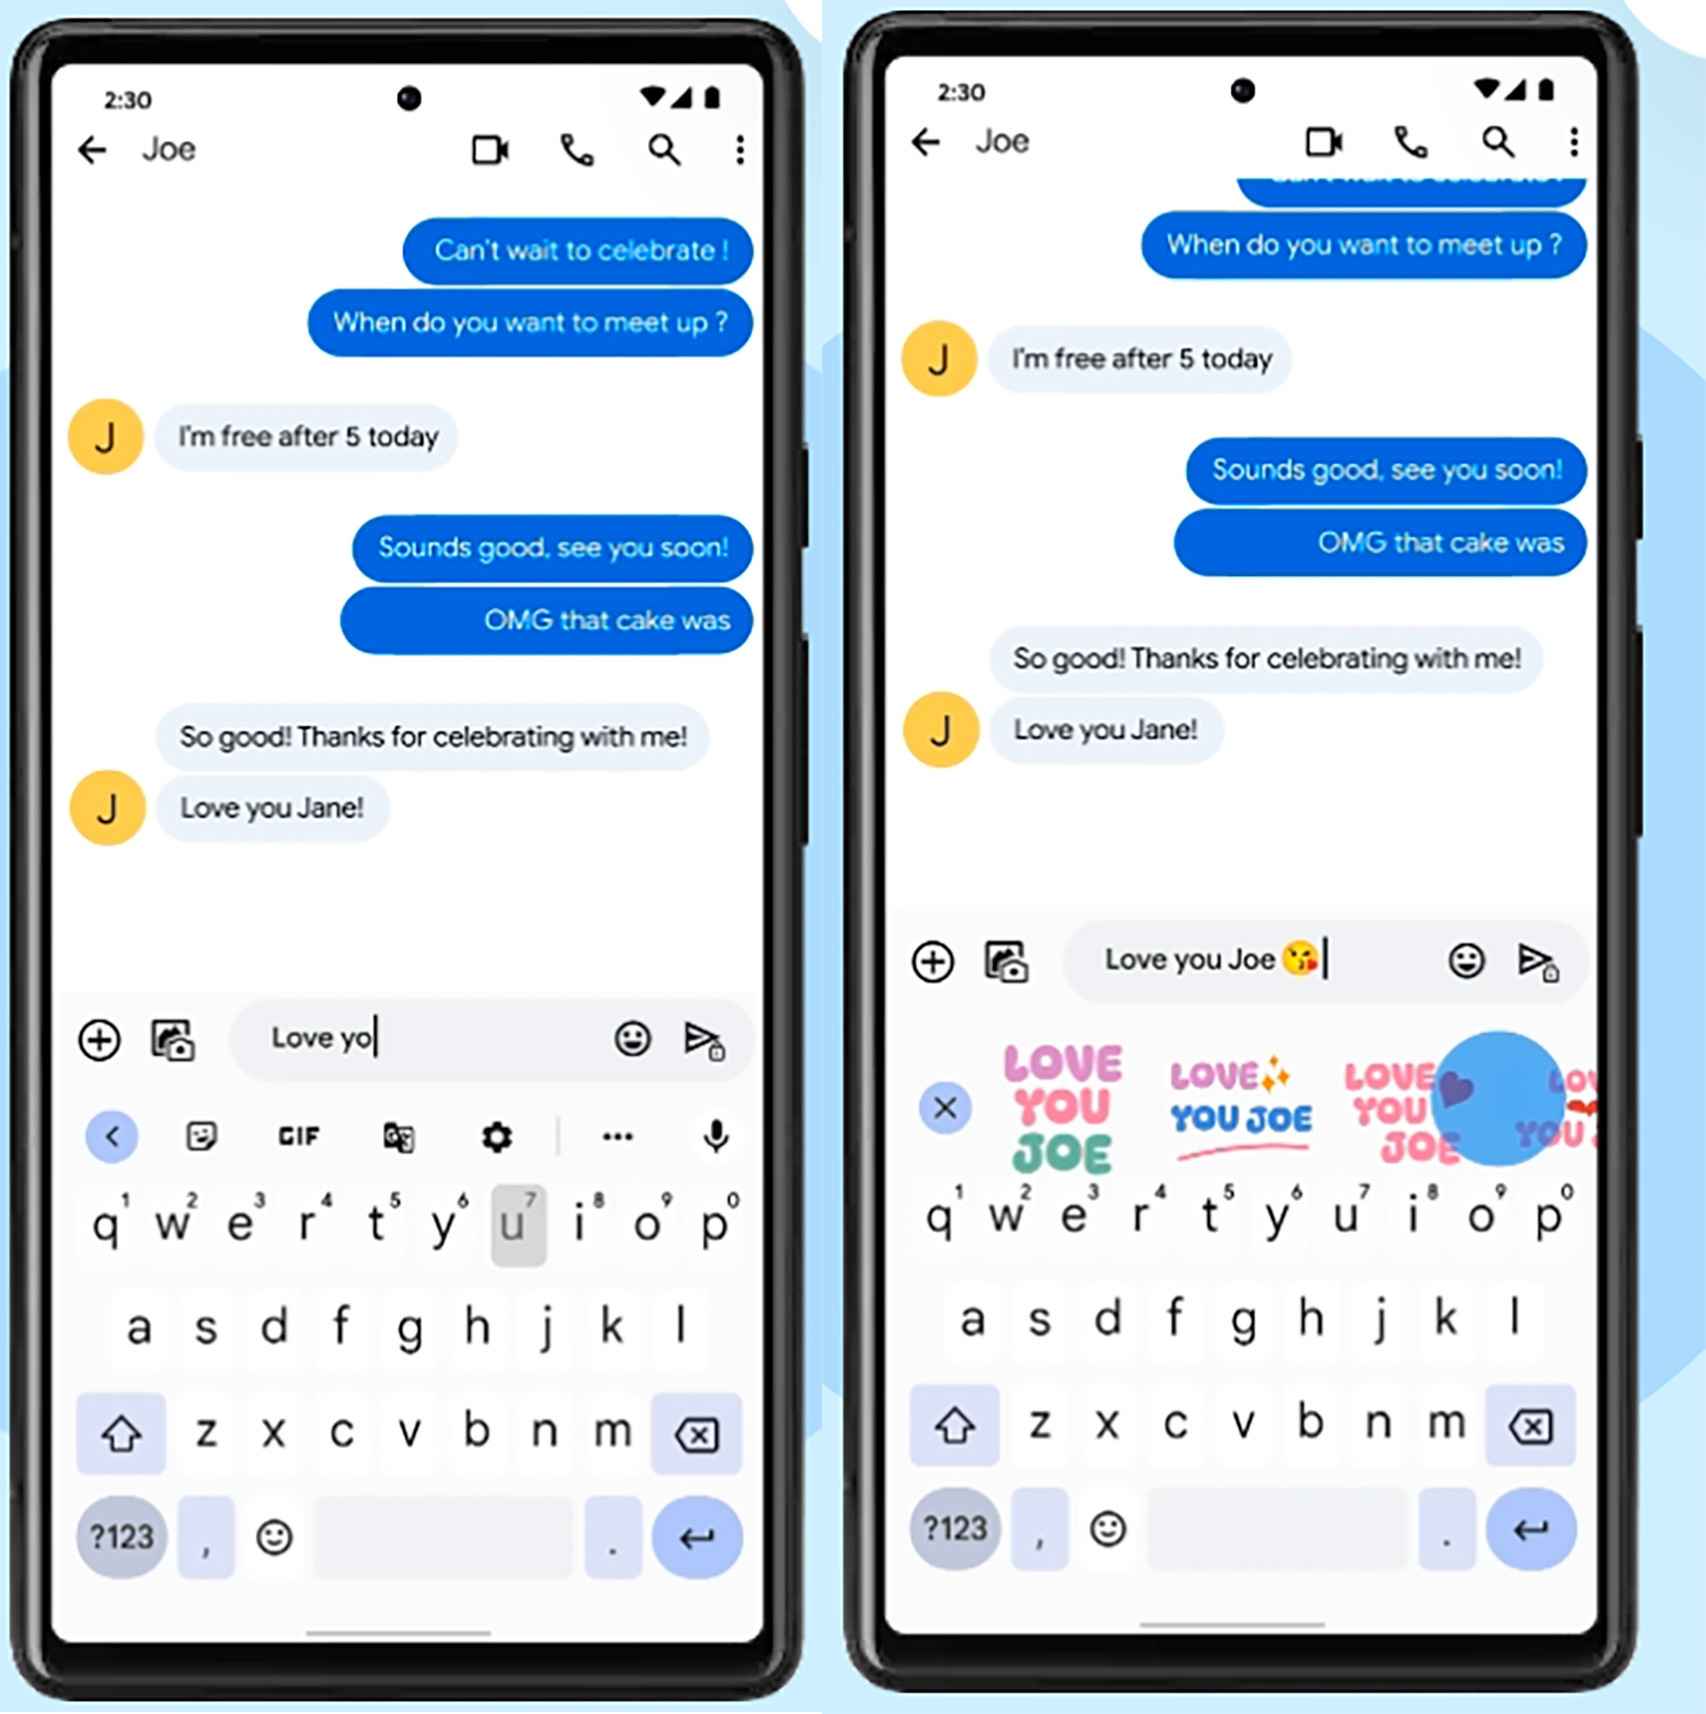 Personalized messages based on what is typed